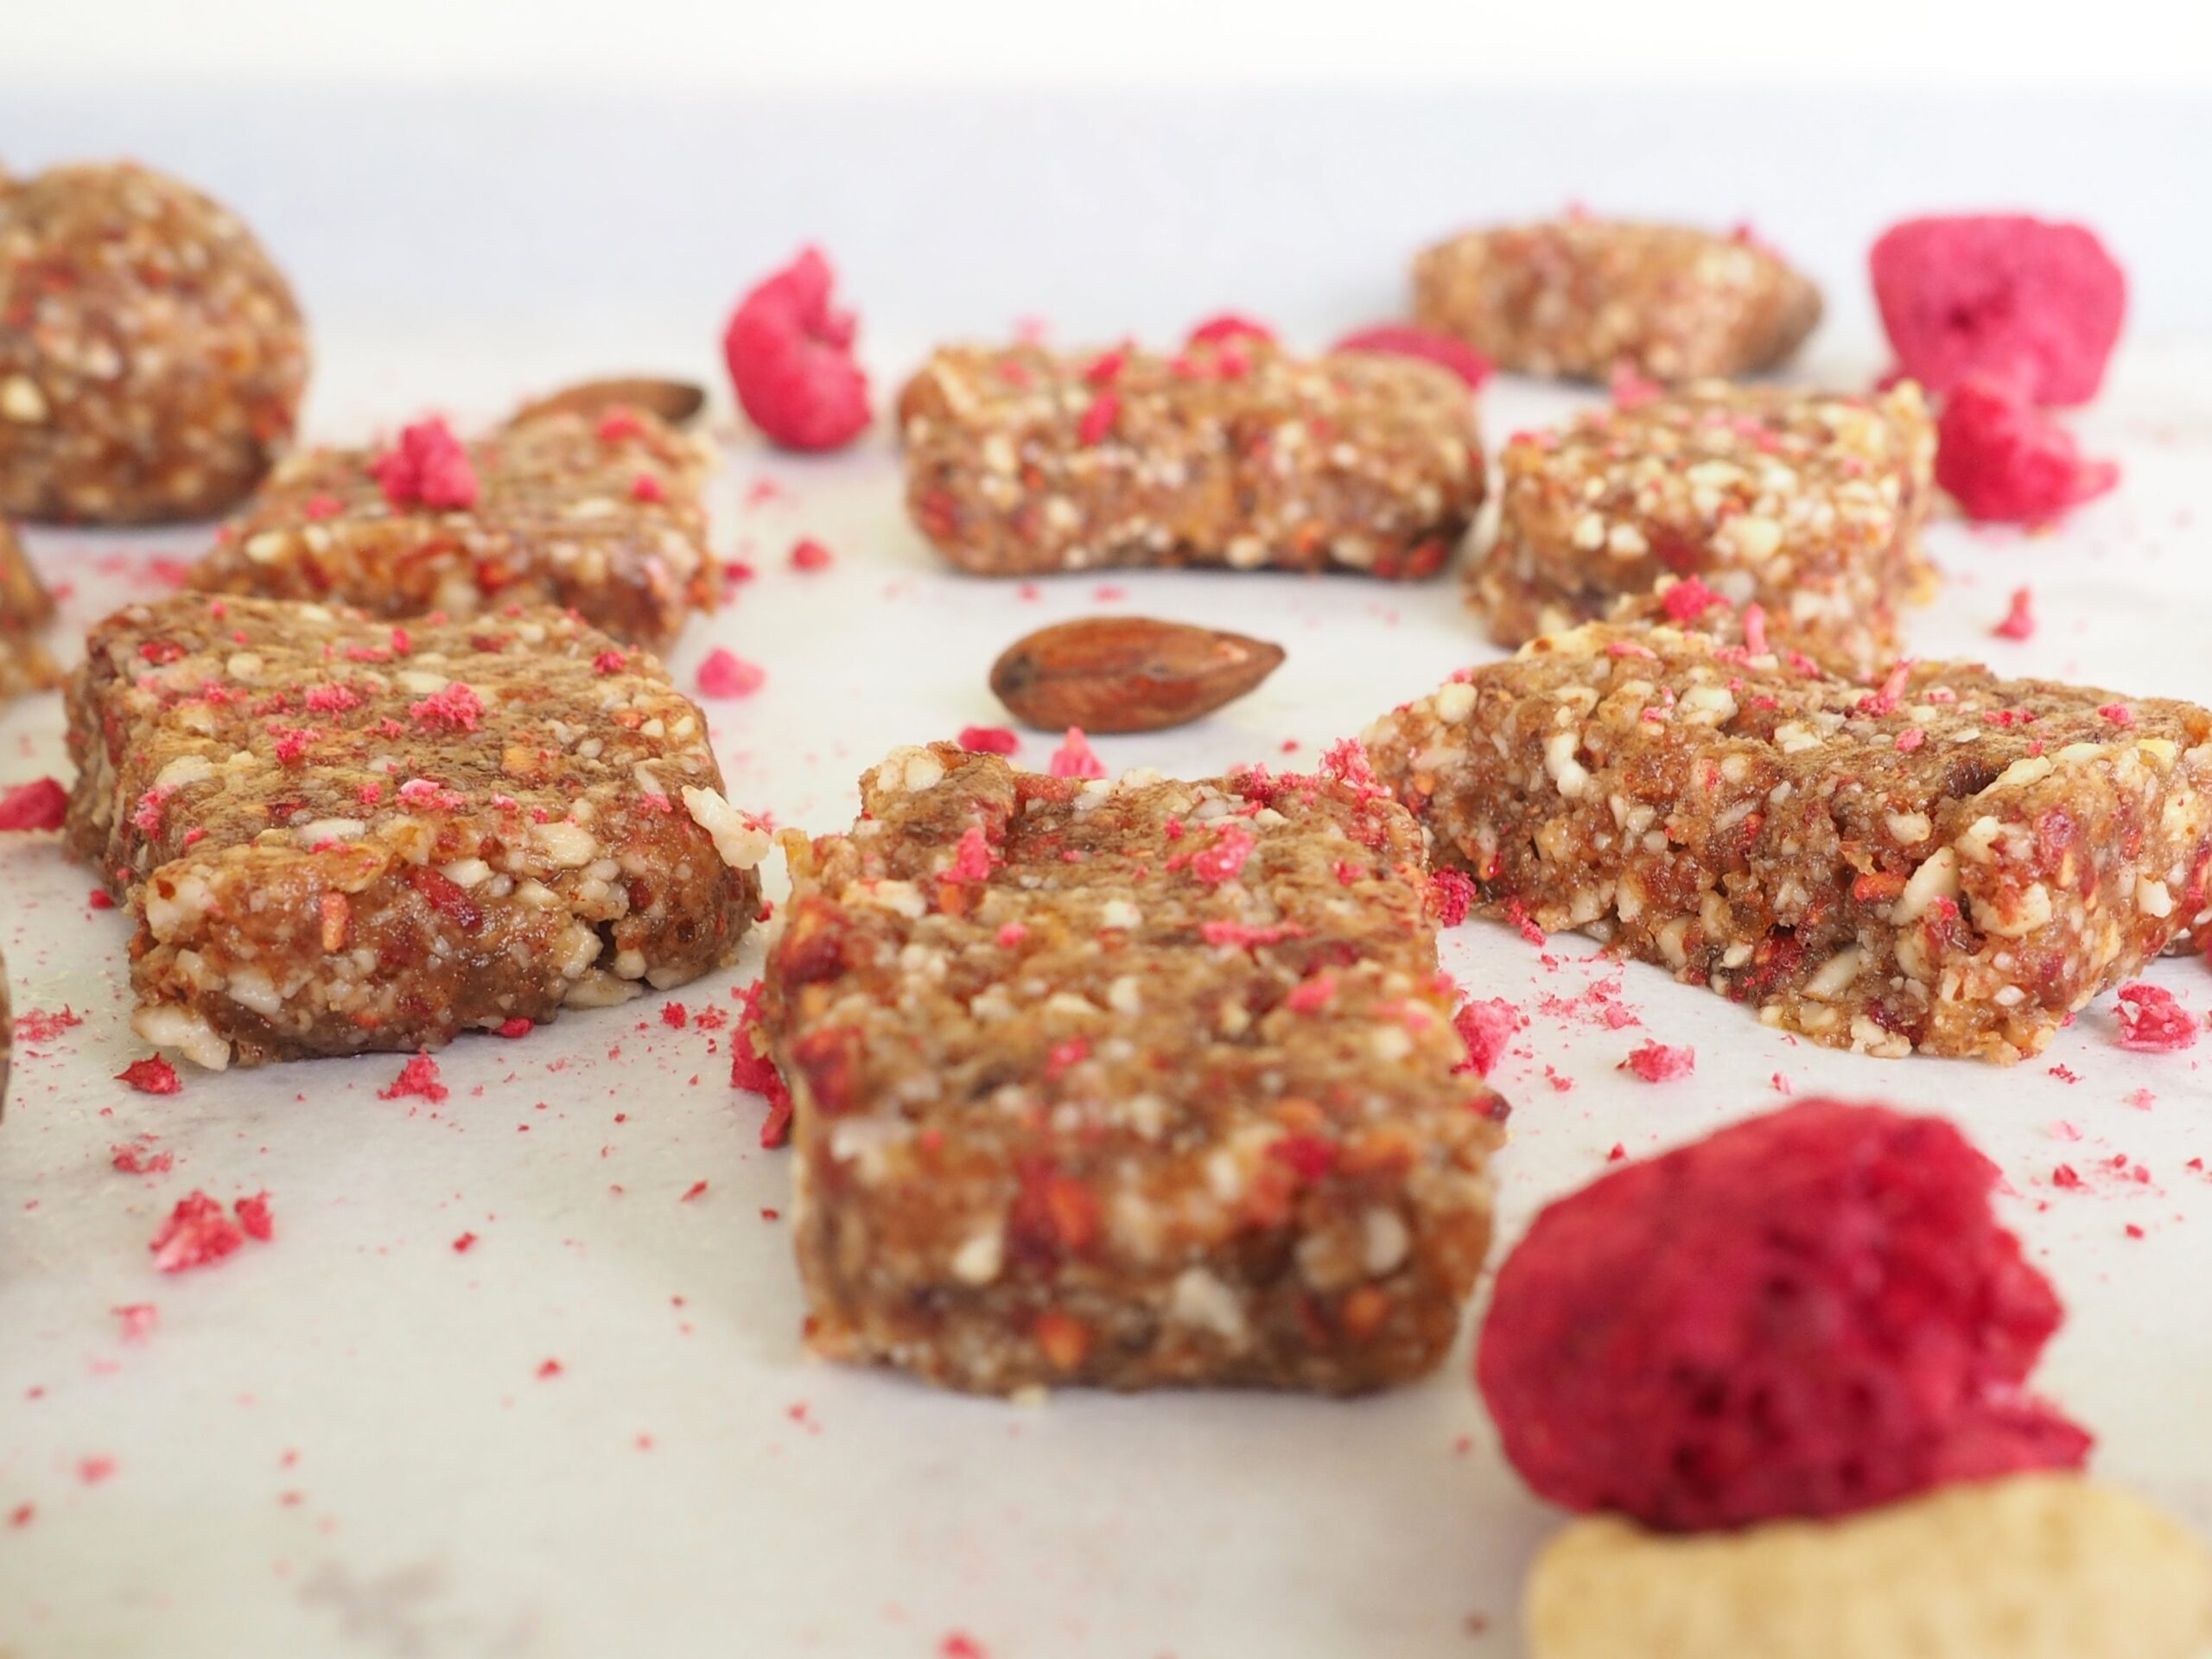 These raspberry almond power bites make a perfect snack, coffee pairing, or athletic fuel. No-bake, gluten-free, vegan, and kid-approved. From halsanutrition.com